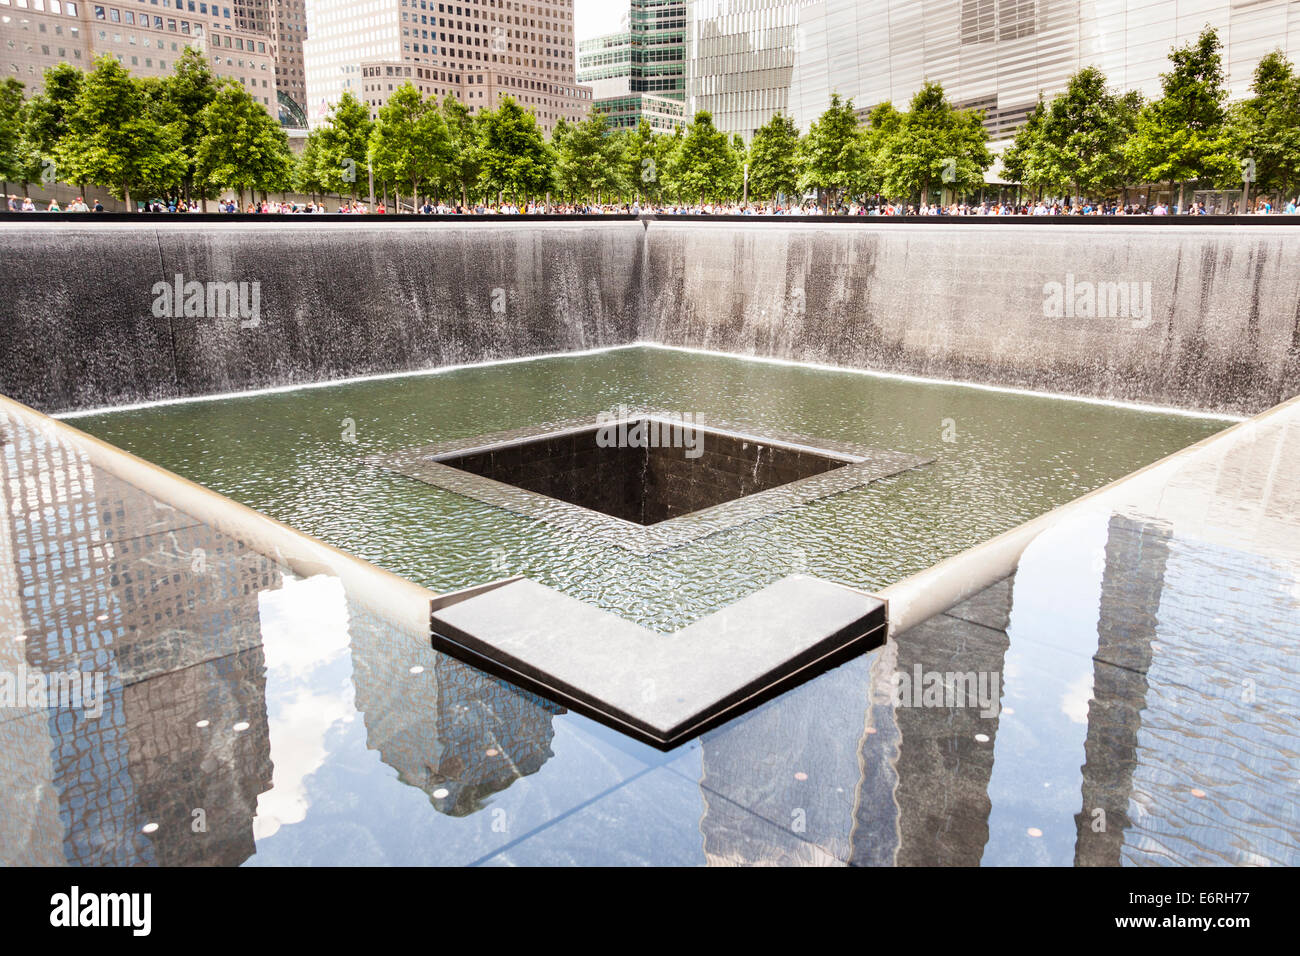 One of the two waterfalls at National September 11 Memorial, World Trade Center, Manhattan, New York City, New York, USA Stock Photo